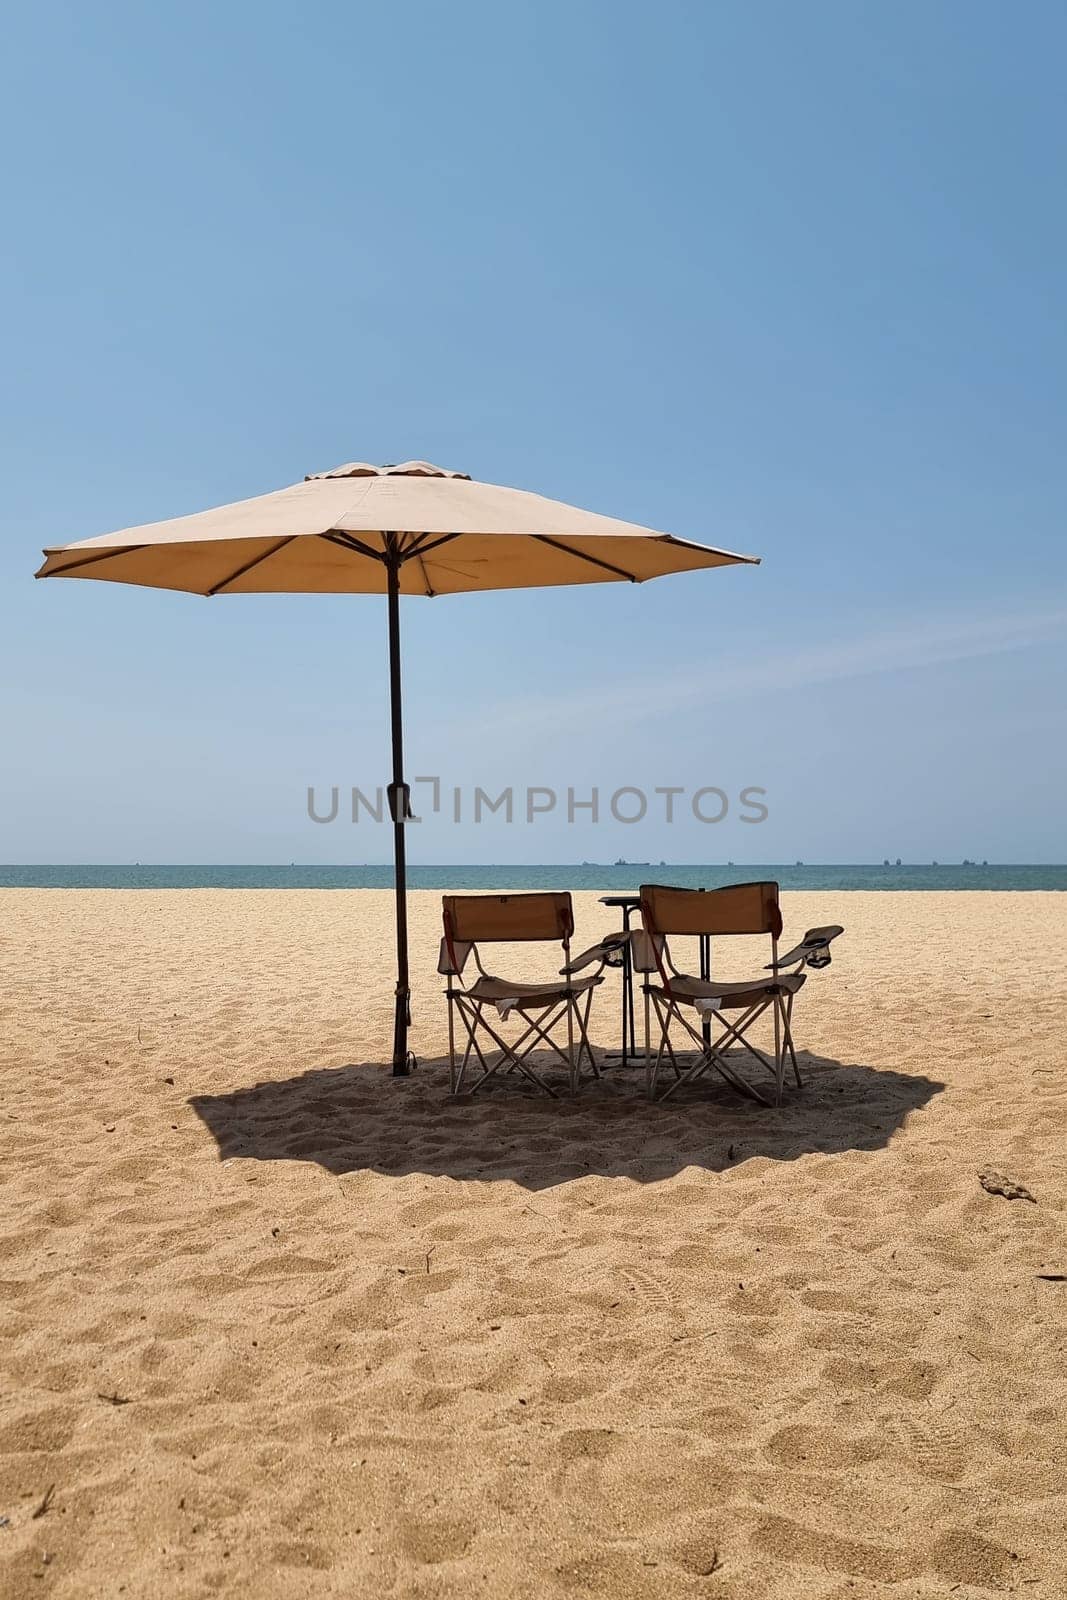 Two chairs sit nestled under a colorful umbrella on a serene sandy beach, inviting relaxation and enjoying the scenic ocean view by fokkebok